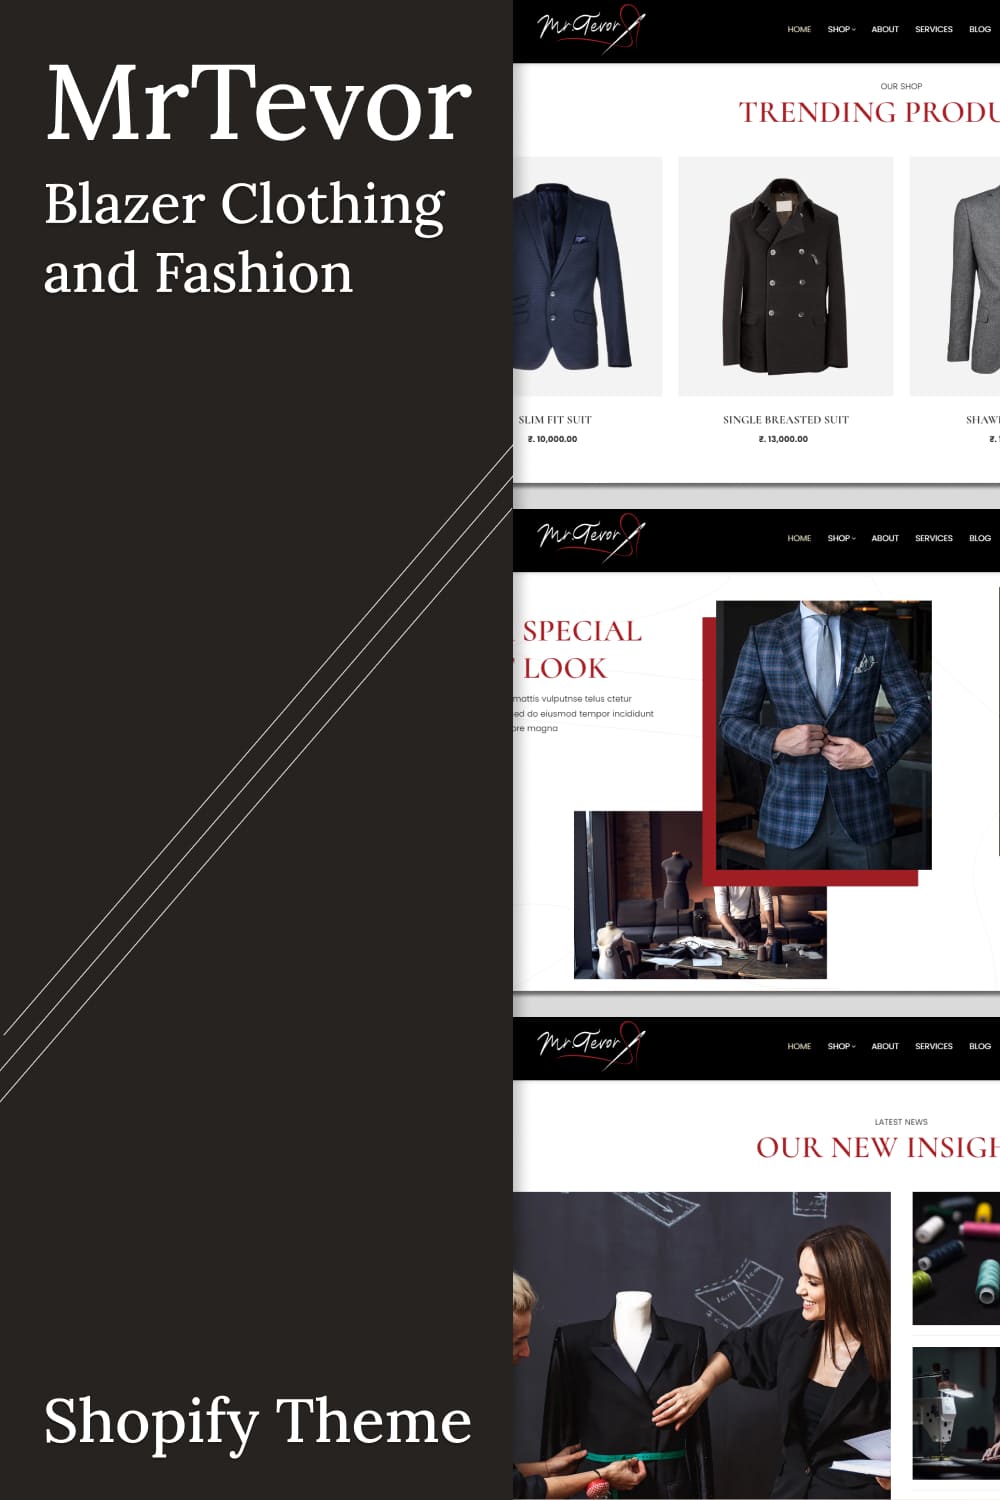 Special look of MrTevor blazer clothing and fashion shopify theme.